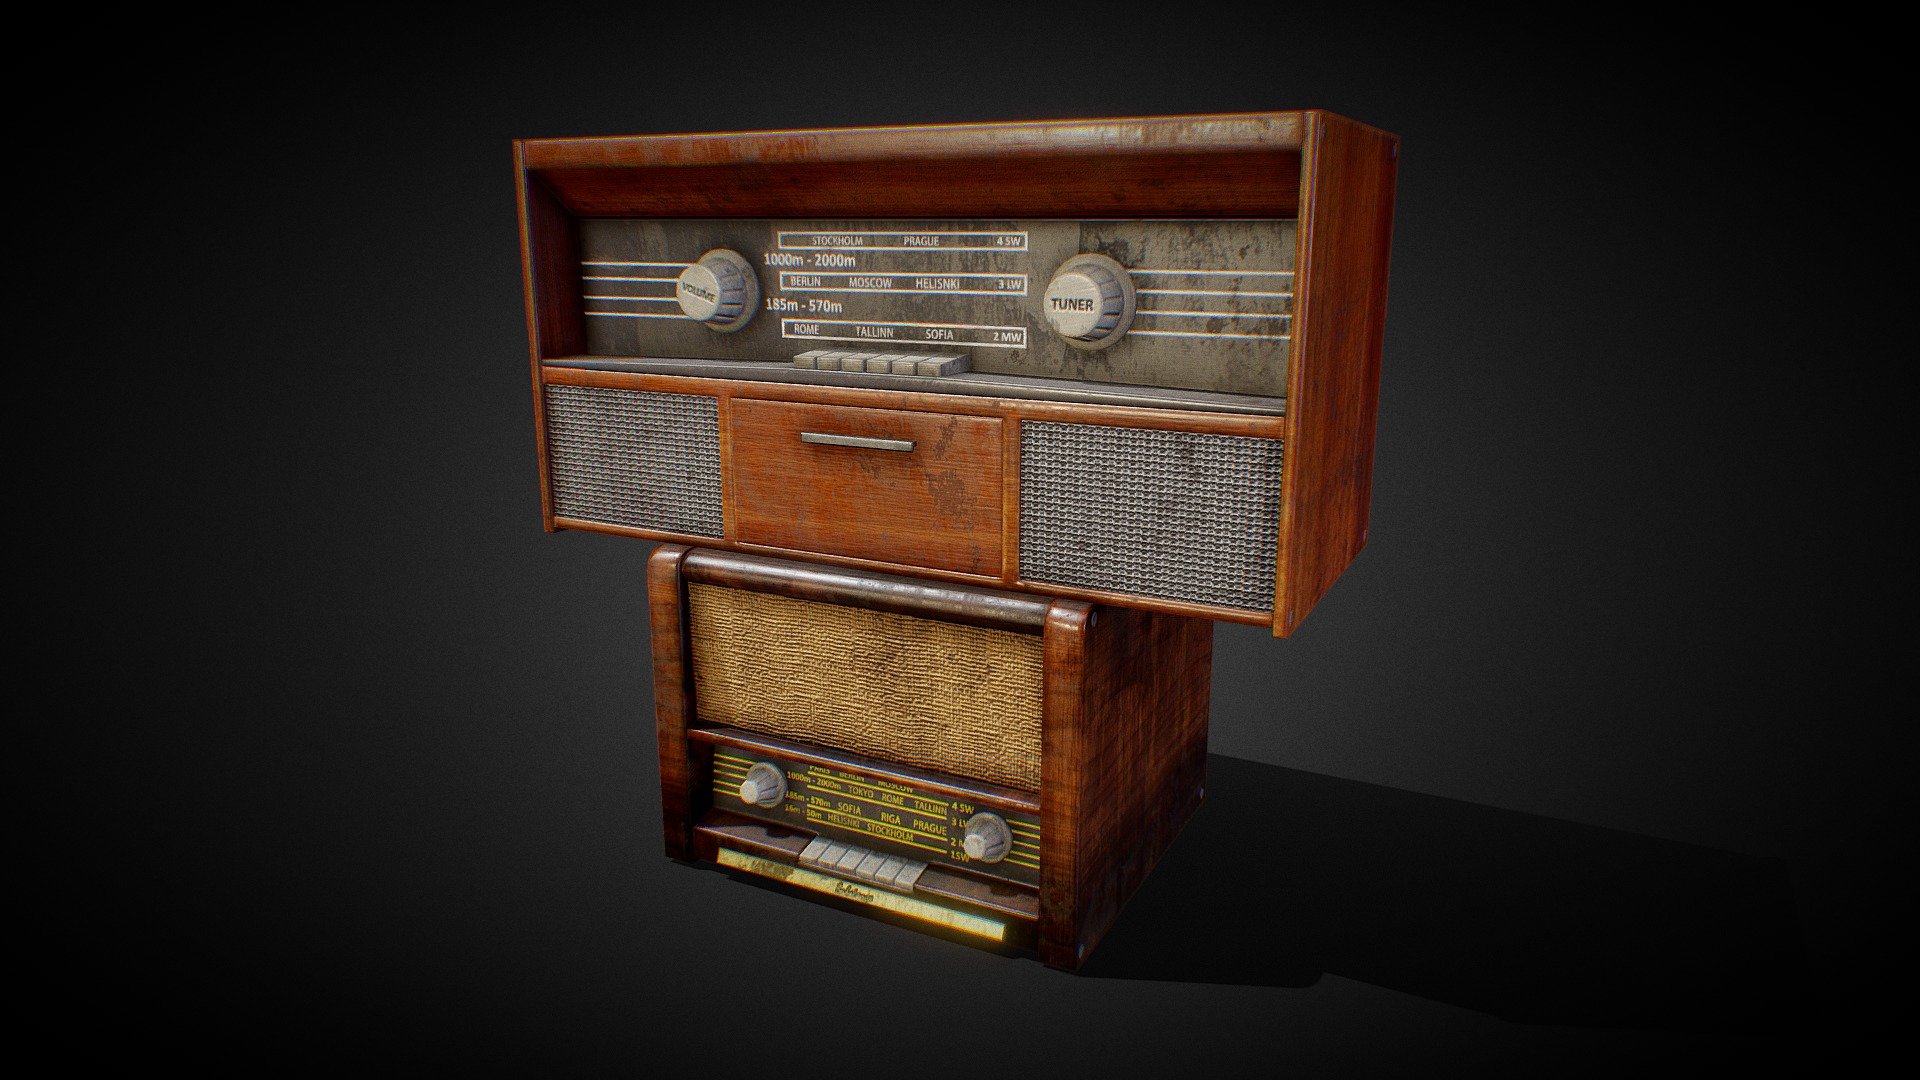 A low poly asset of a radio I made long time ago as a personal project - Retro Radio - 3D model by dmit56 3d model